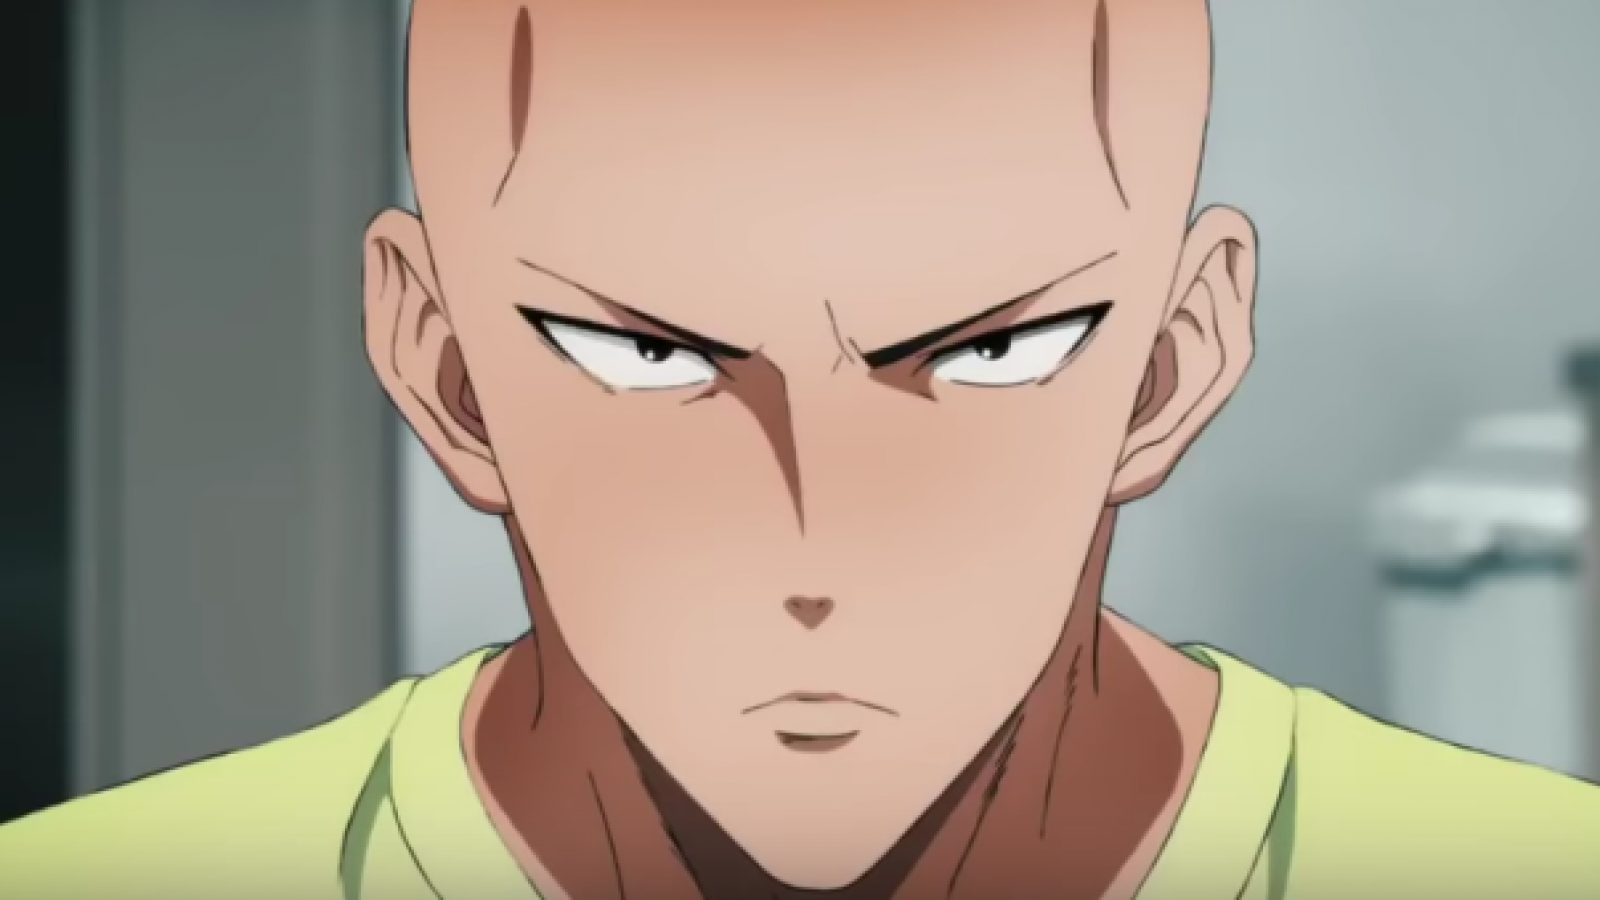 One Punch Man 2: season 2 will be released in April 2019